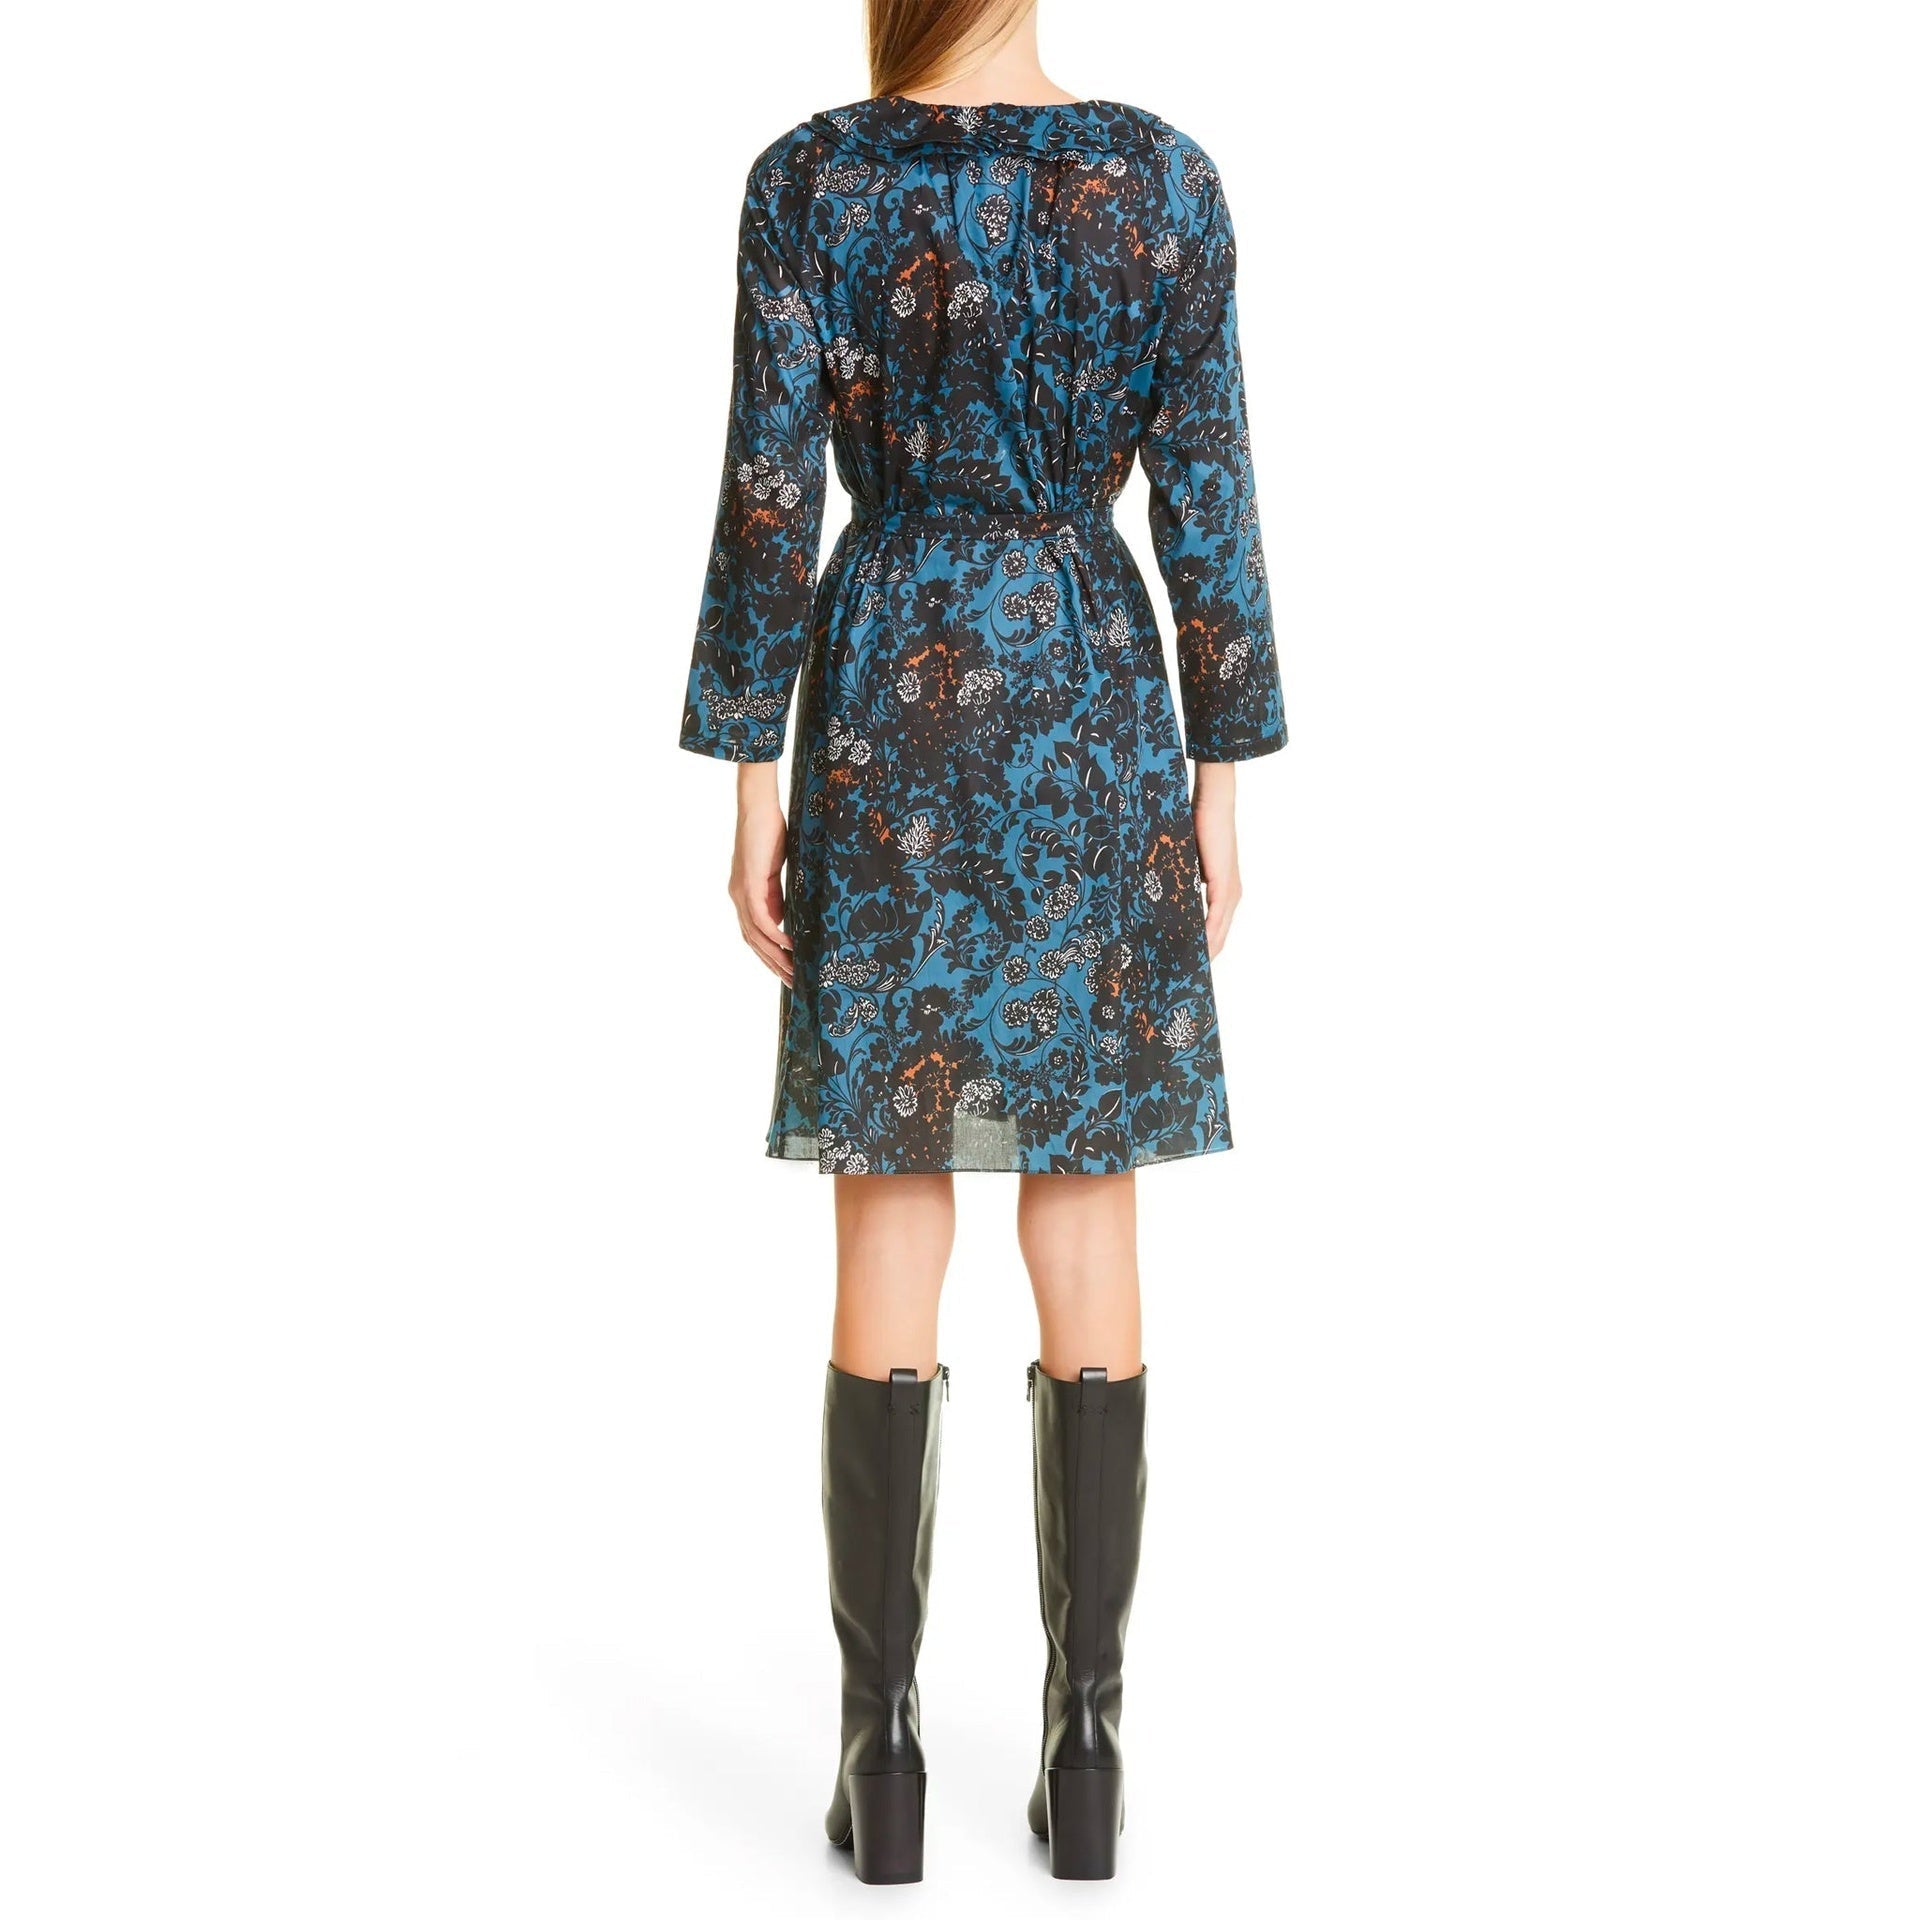 S-MAX-MARA-OUTLET-SALE-s-Max-Mara-Fiorito-Floral-Dress-Kleider-Rocke-ARCHIVE-COLLECTION-3.jpg